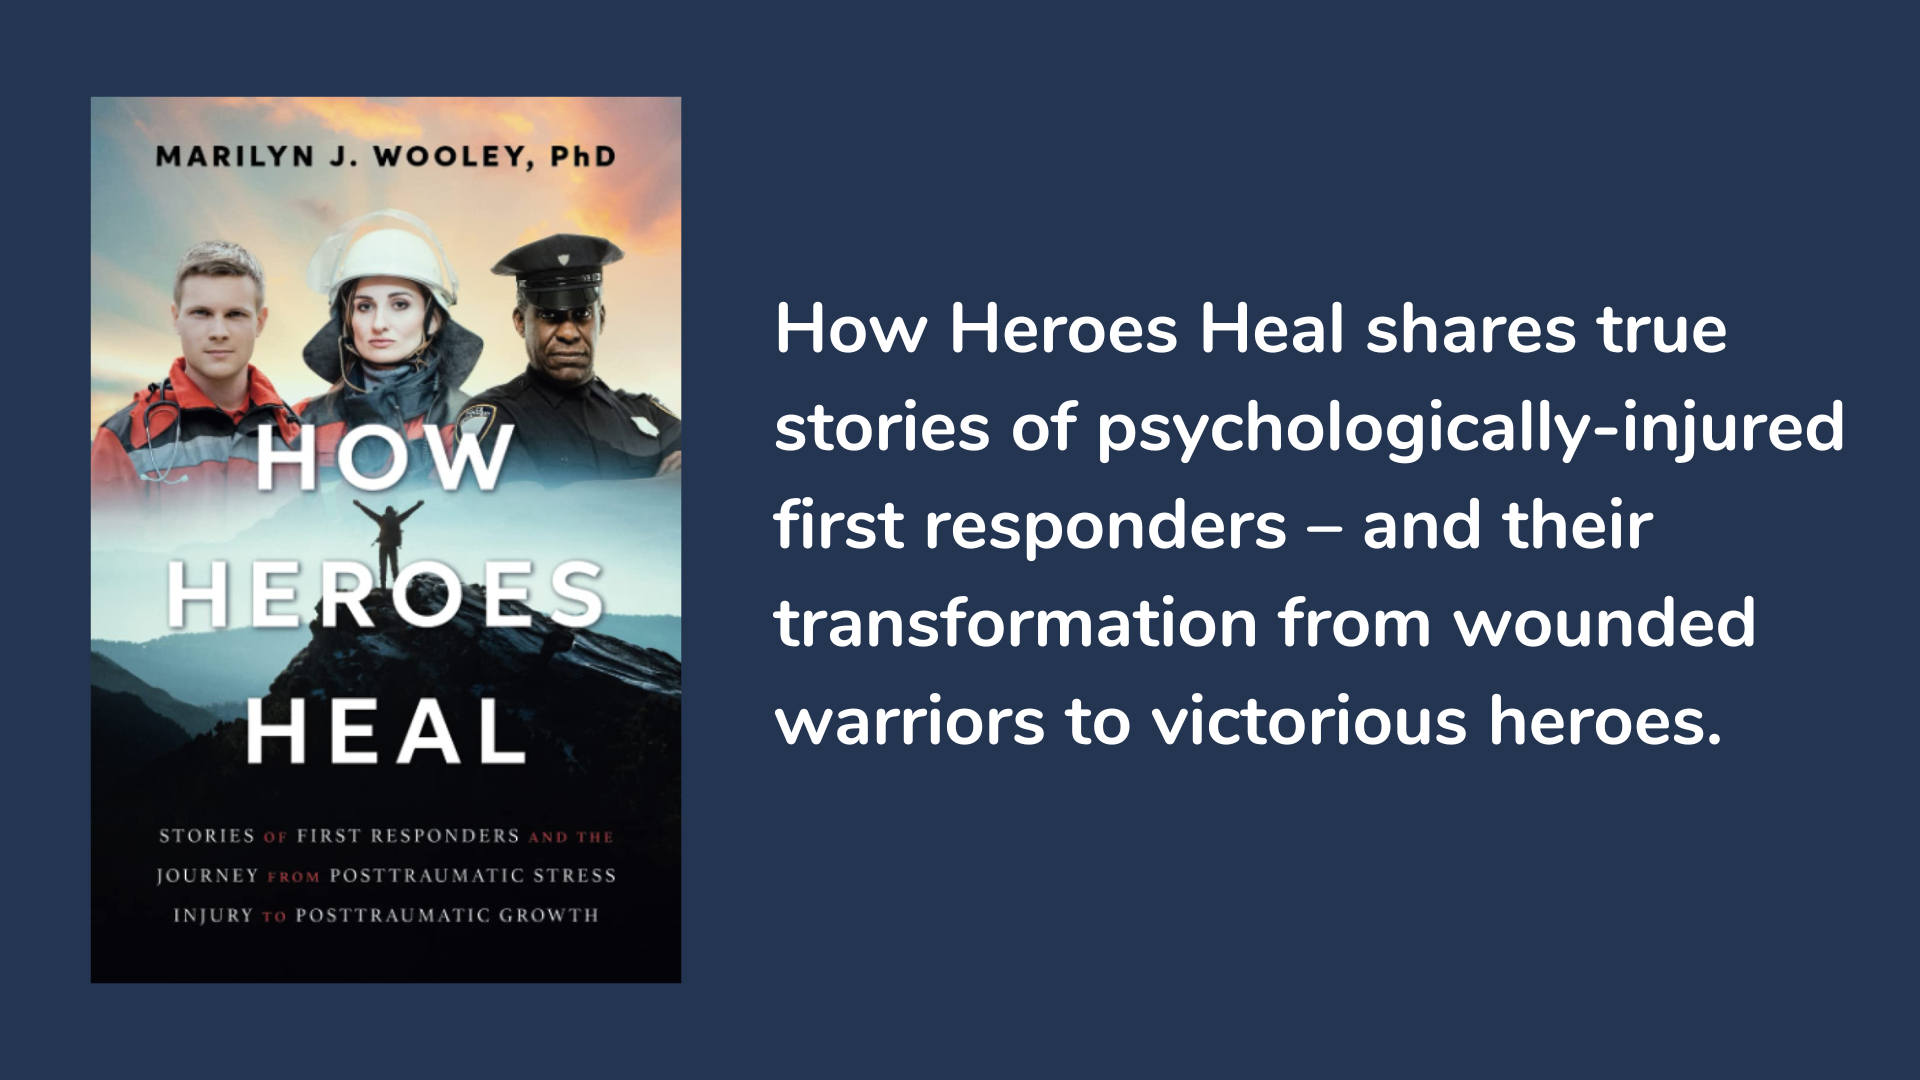 How Heroes Heal: Stories of First Responders and the Journey from Posttraumatic Stress Injury to Posttraumatic Growth, book cover and description.